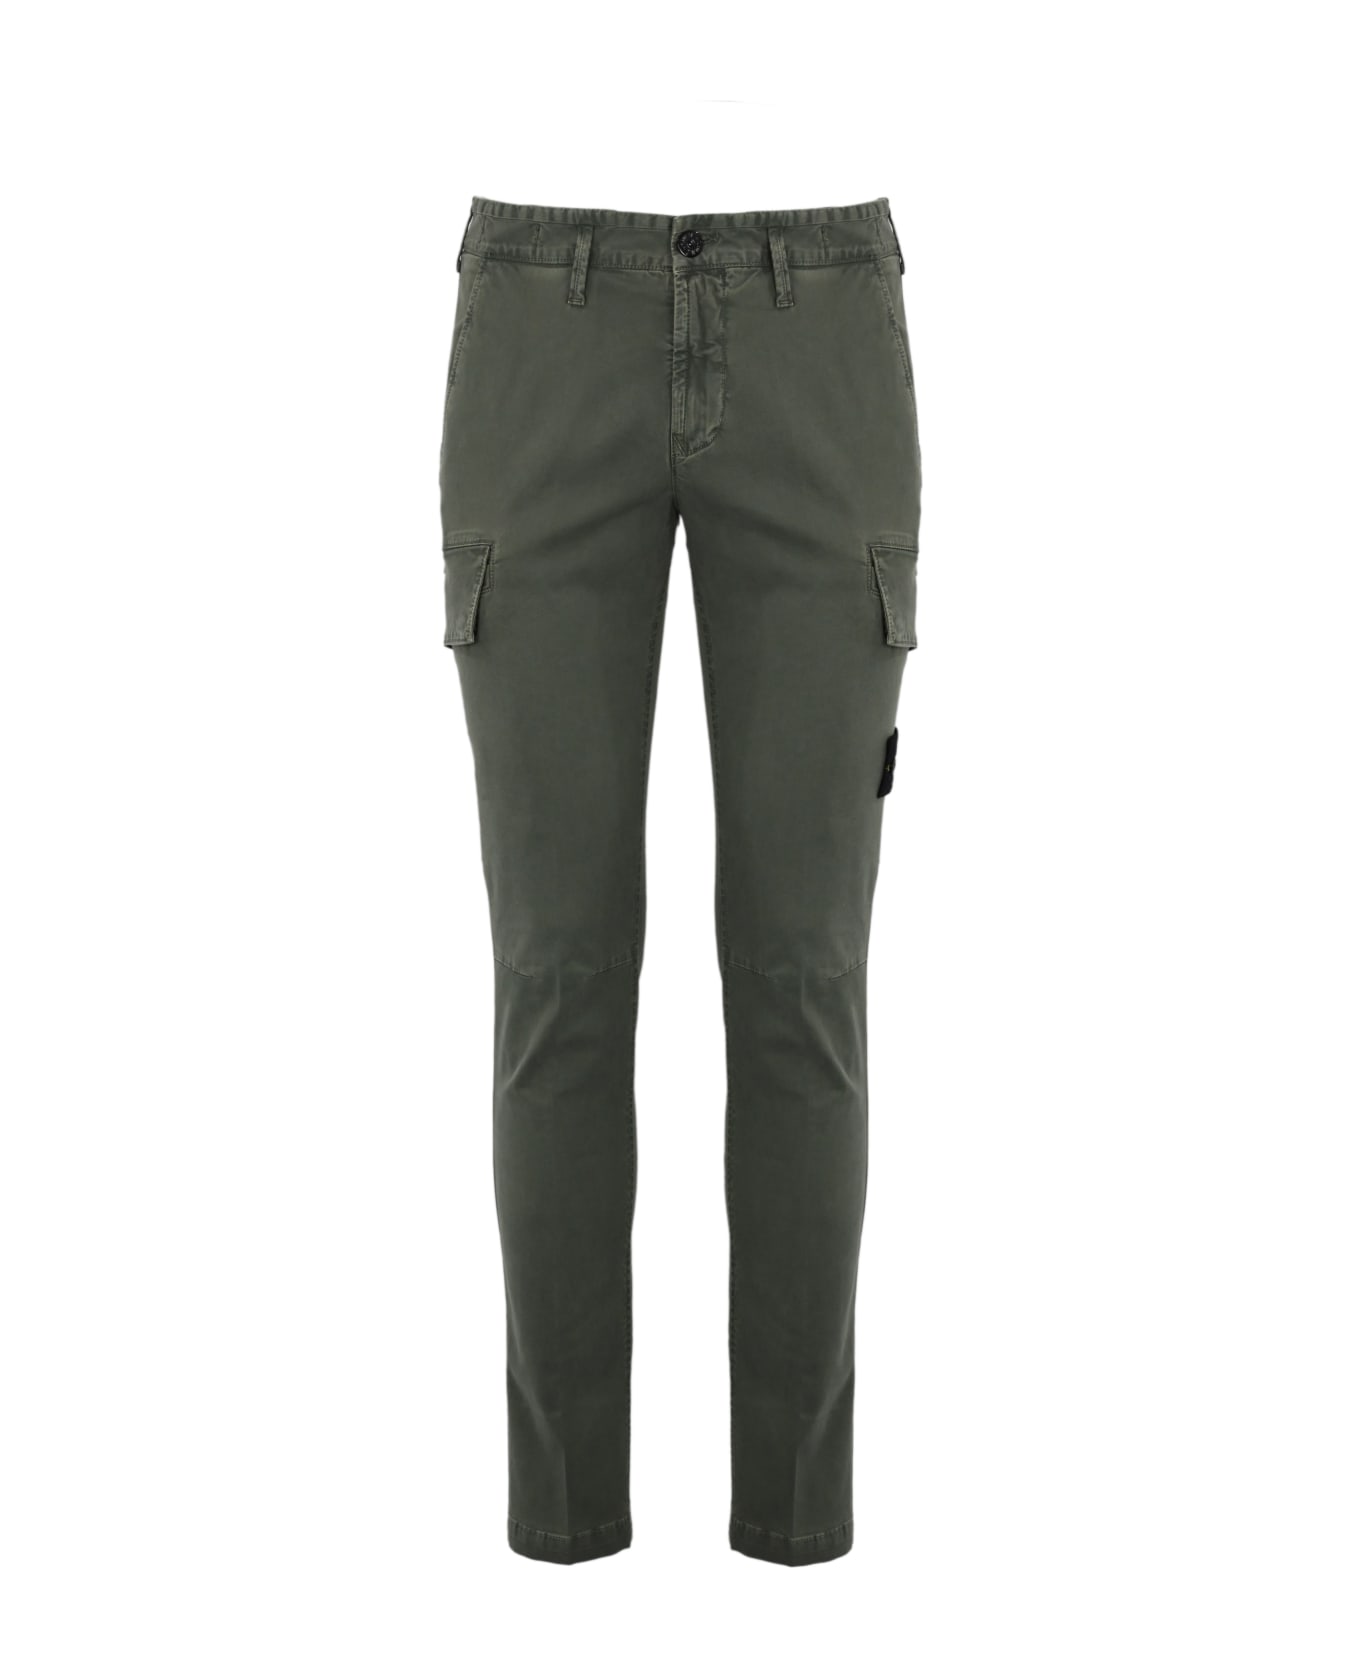 Stone Island Cargo Trousers 30604 Old Treatment - Musk